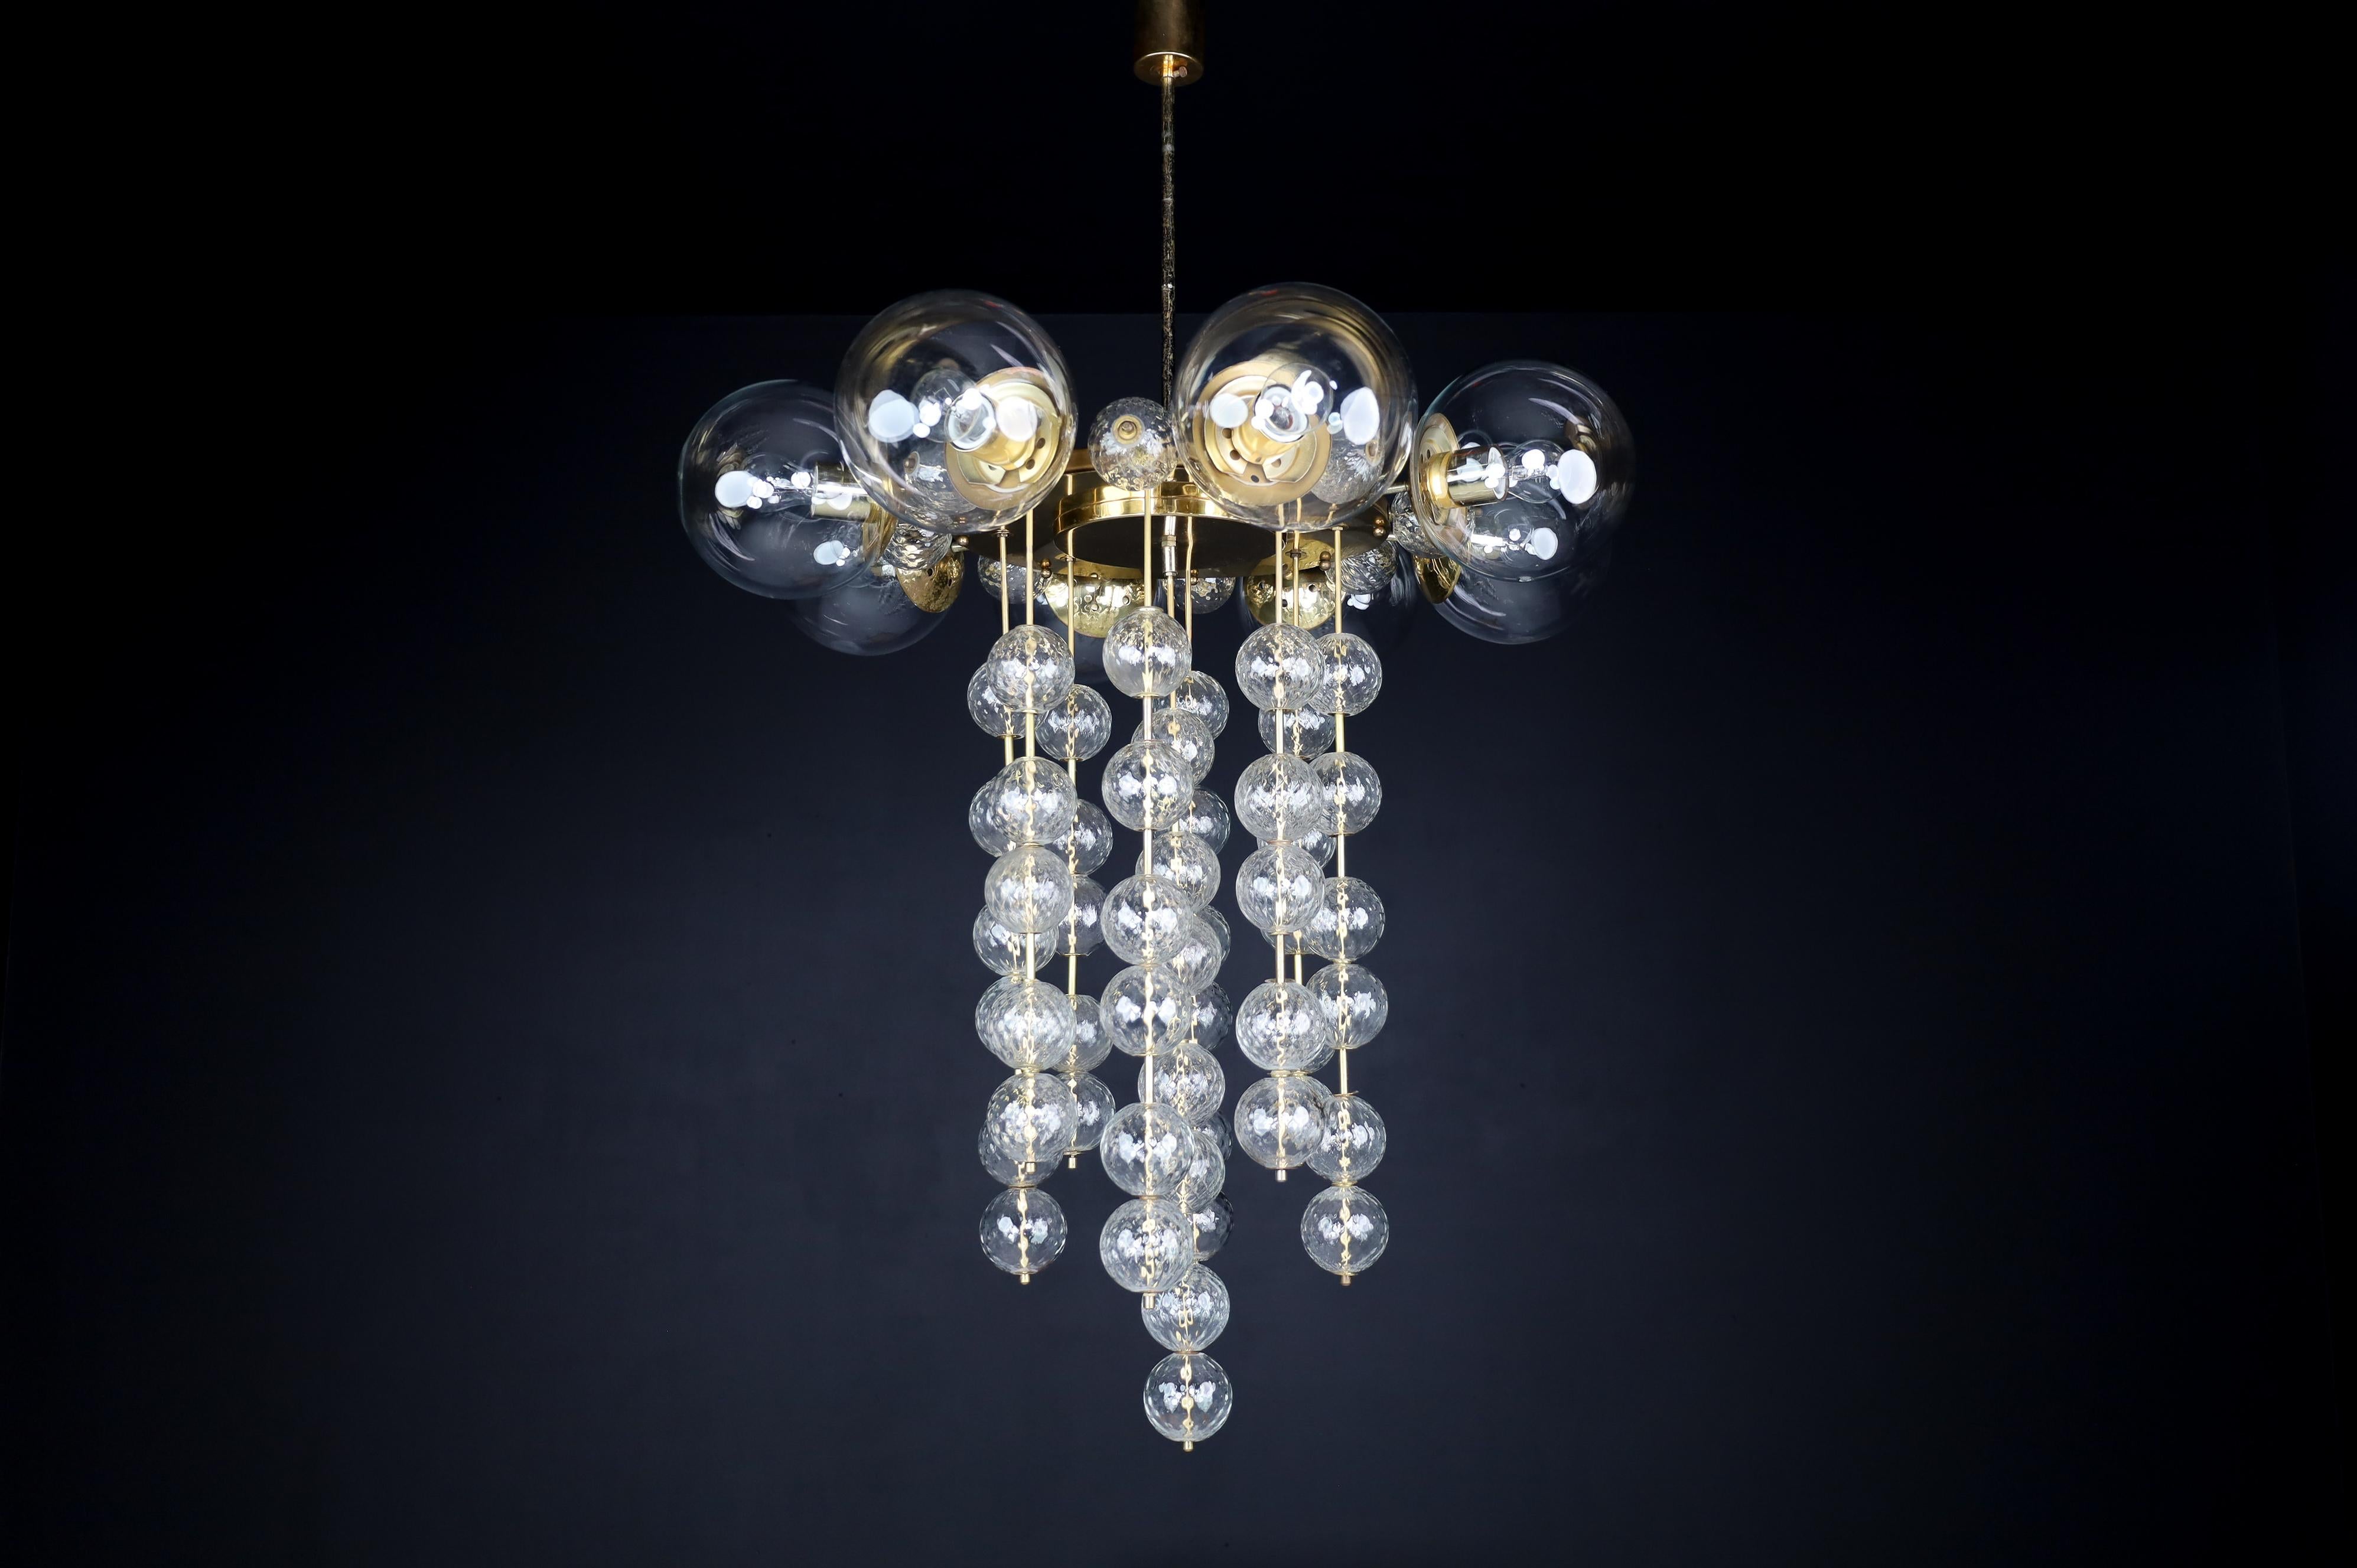 Grand Chandelier with Brass Fixture and Hand-blowed Glass Globes, 1960s For Sale 6